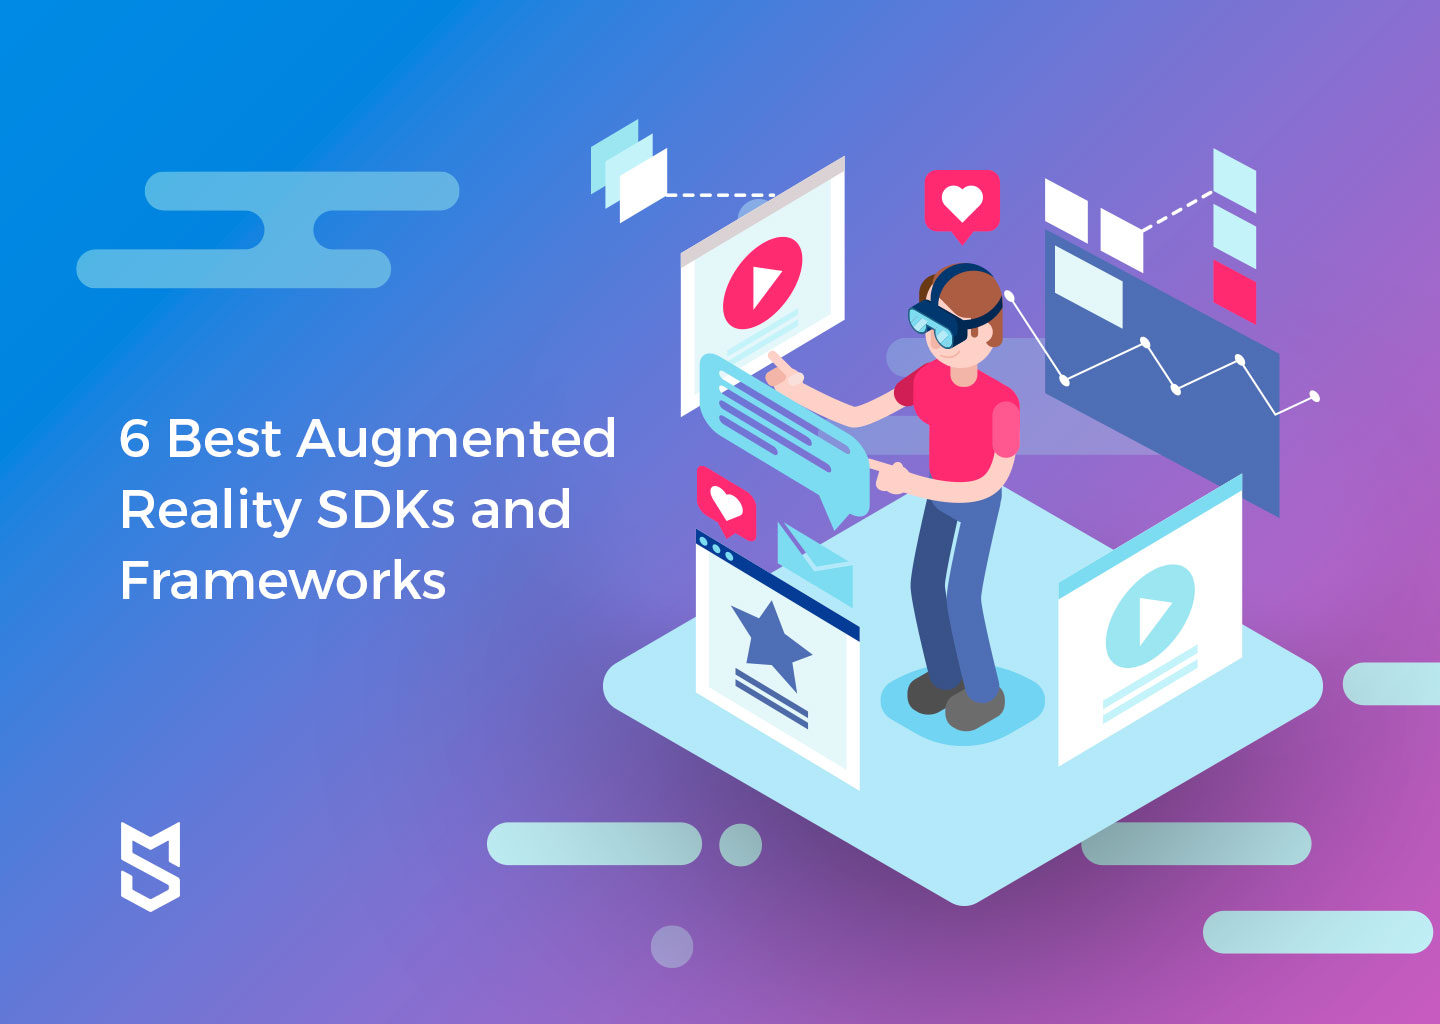 6 Best Augmented Reality Sdks And Frameworks 𝗠𝗶𝗻𝗱 𝗦𝘁𝘂𝗱𝗶𝗼𝘀